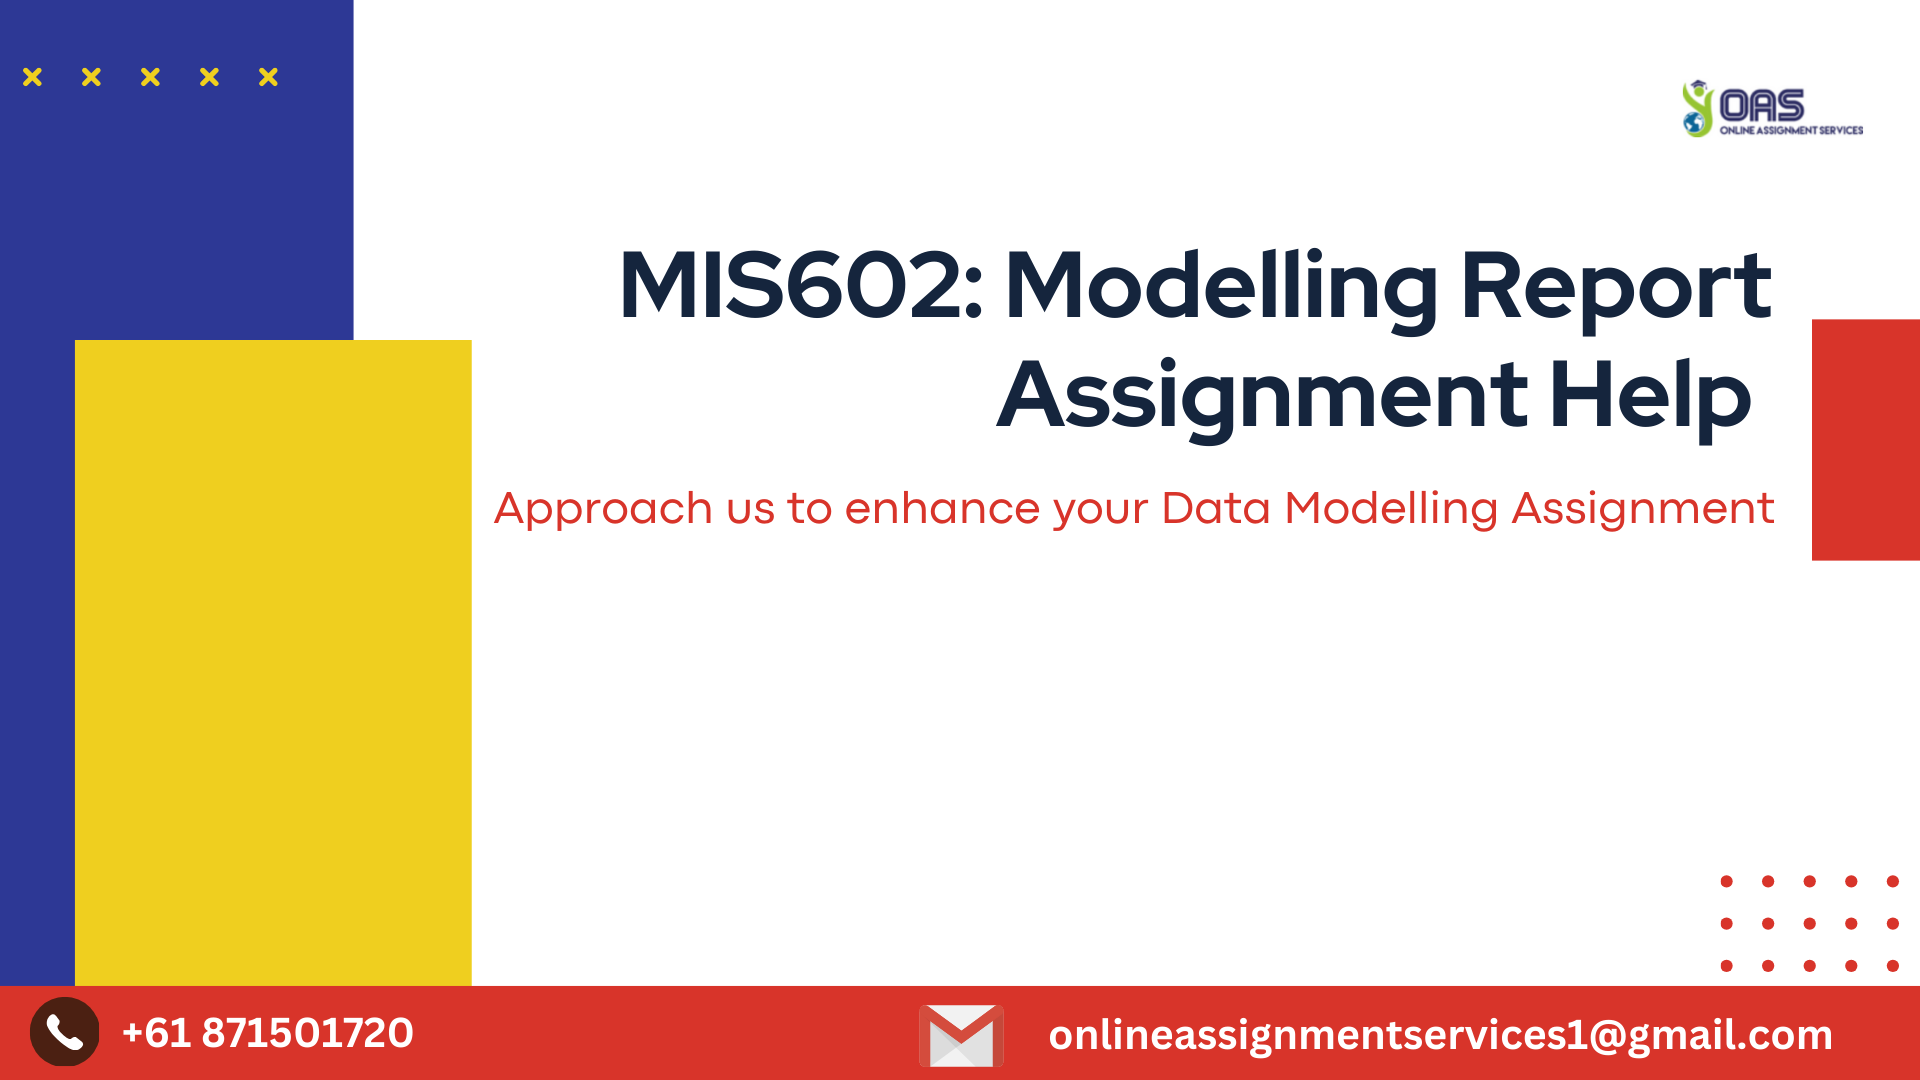 MIS602 Modelling Report Assignment Help  - Online Assignment Services